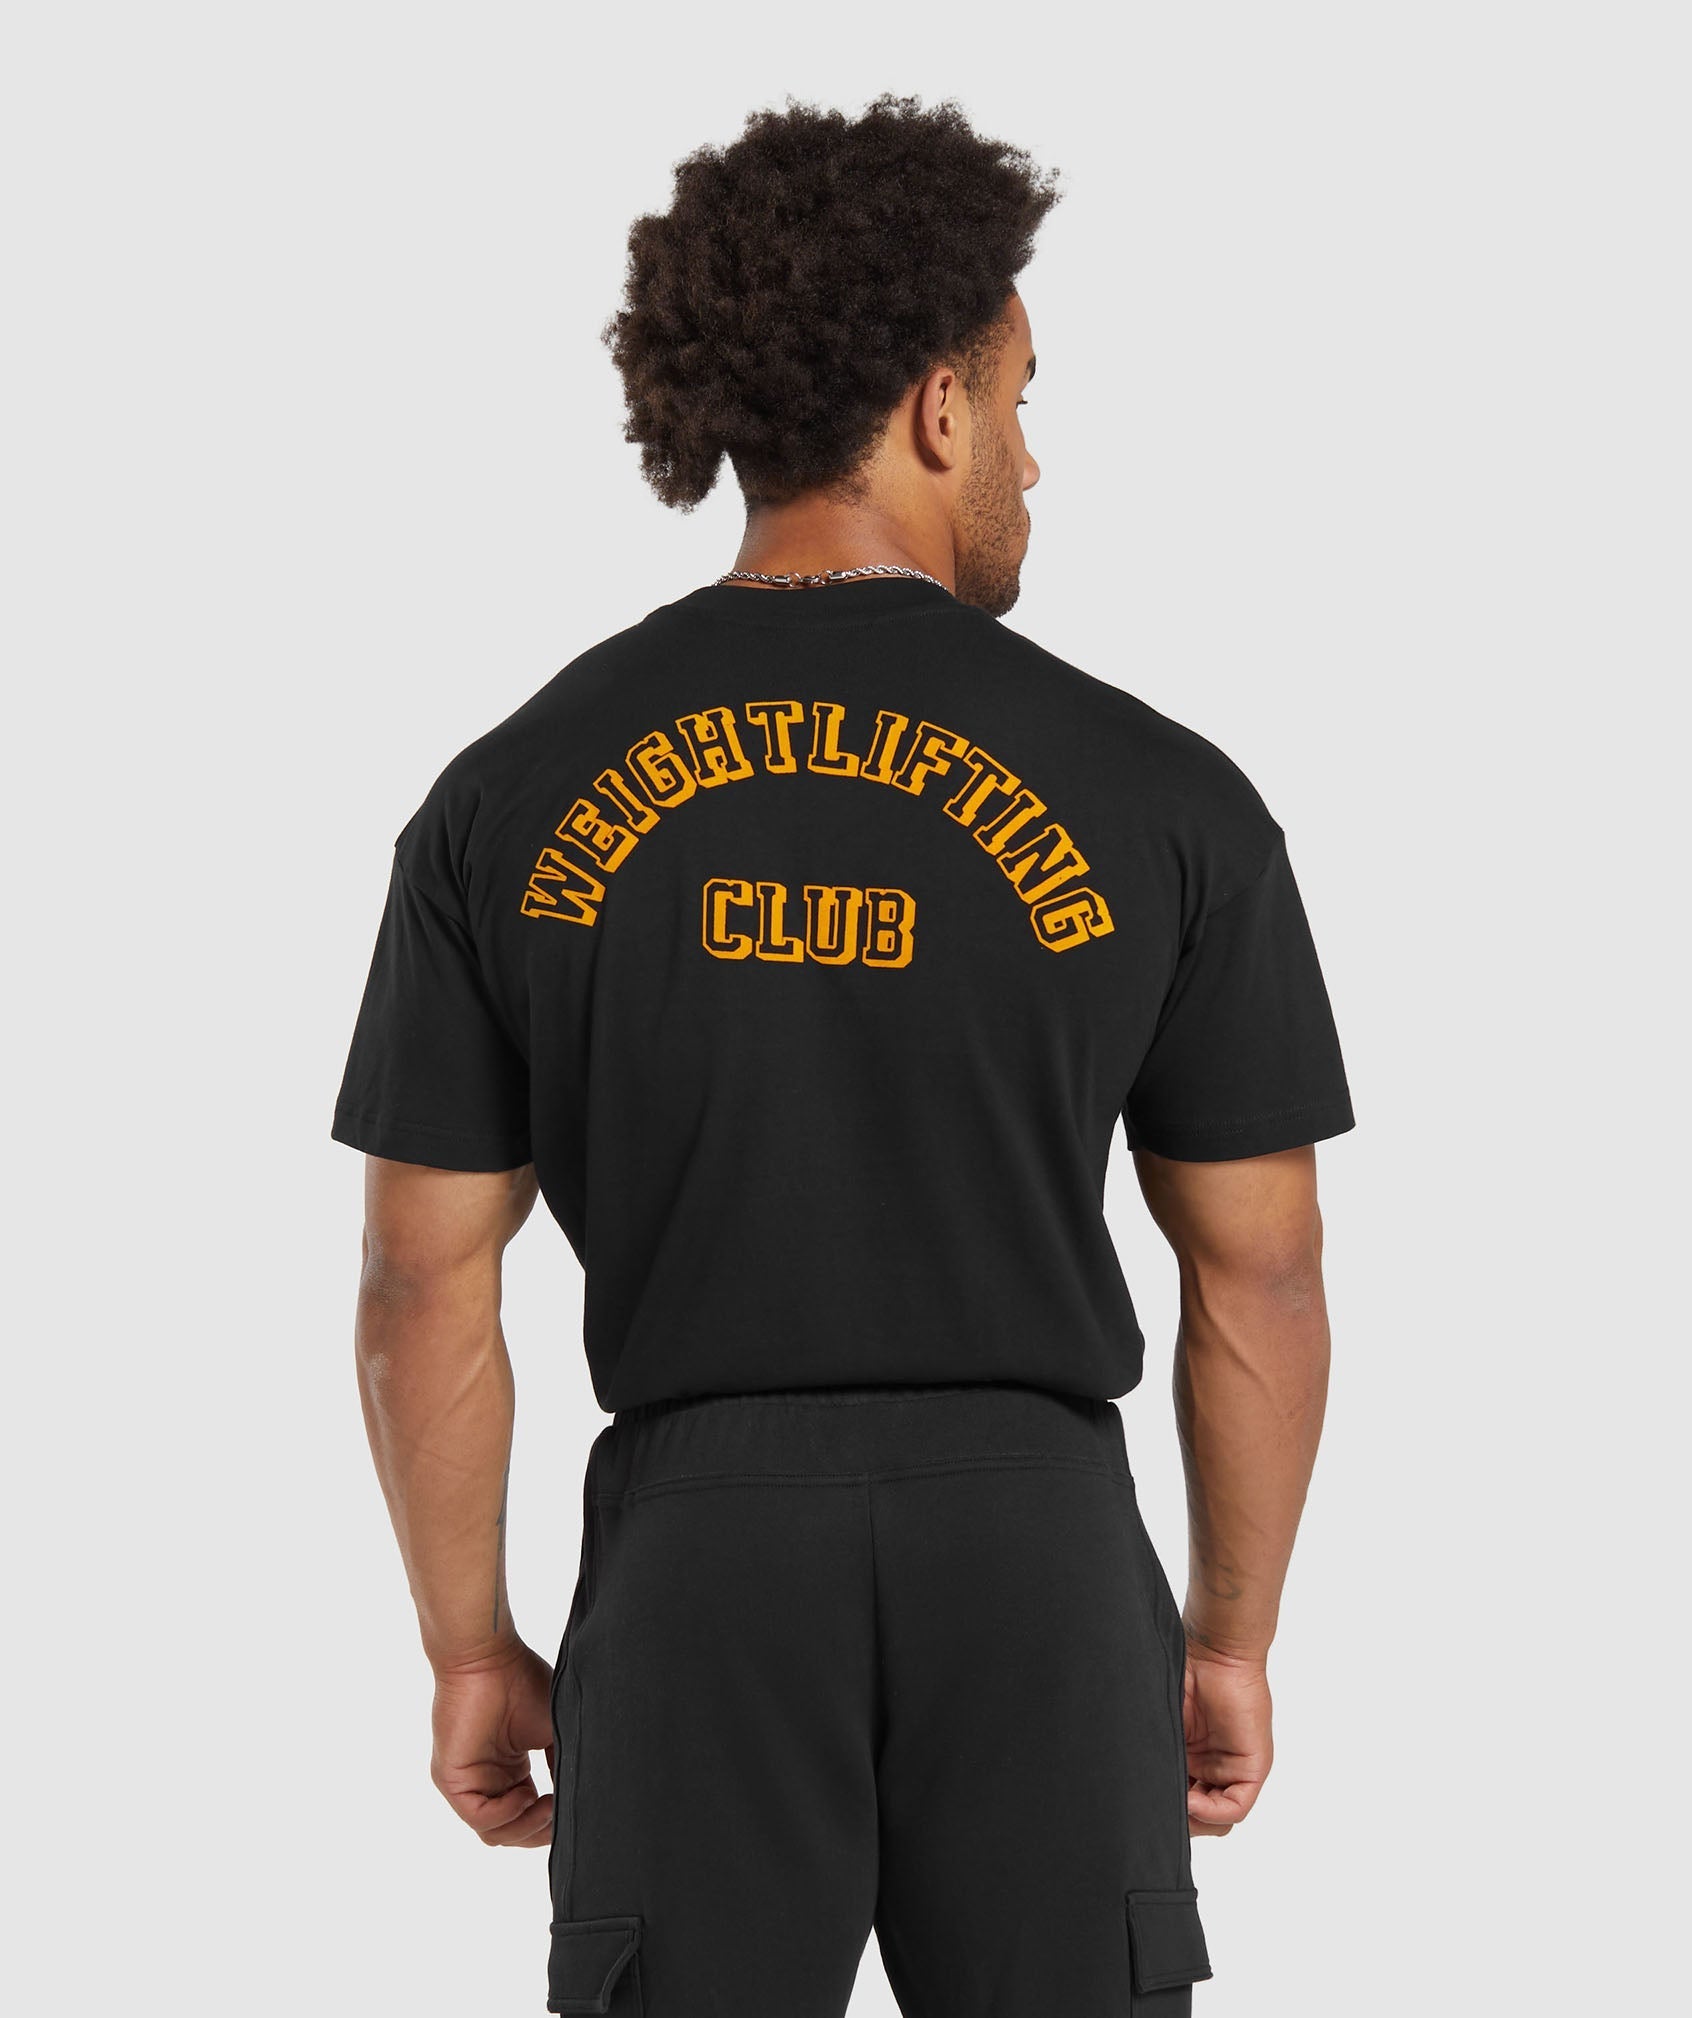 Weightlifting Club T-Shirt in Black - view 1